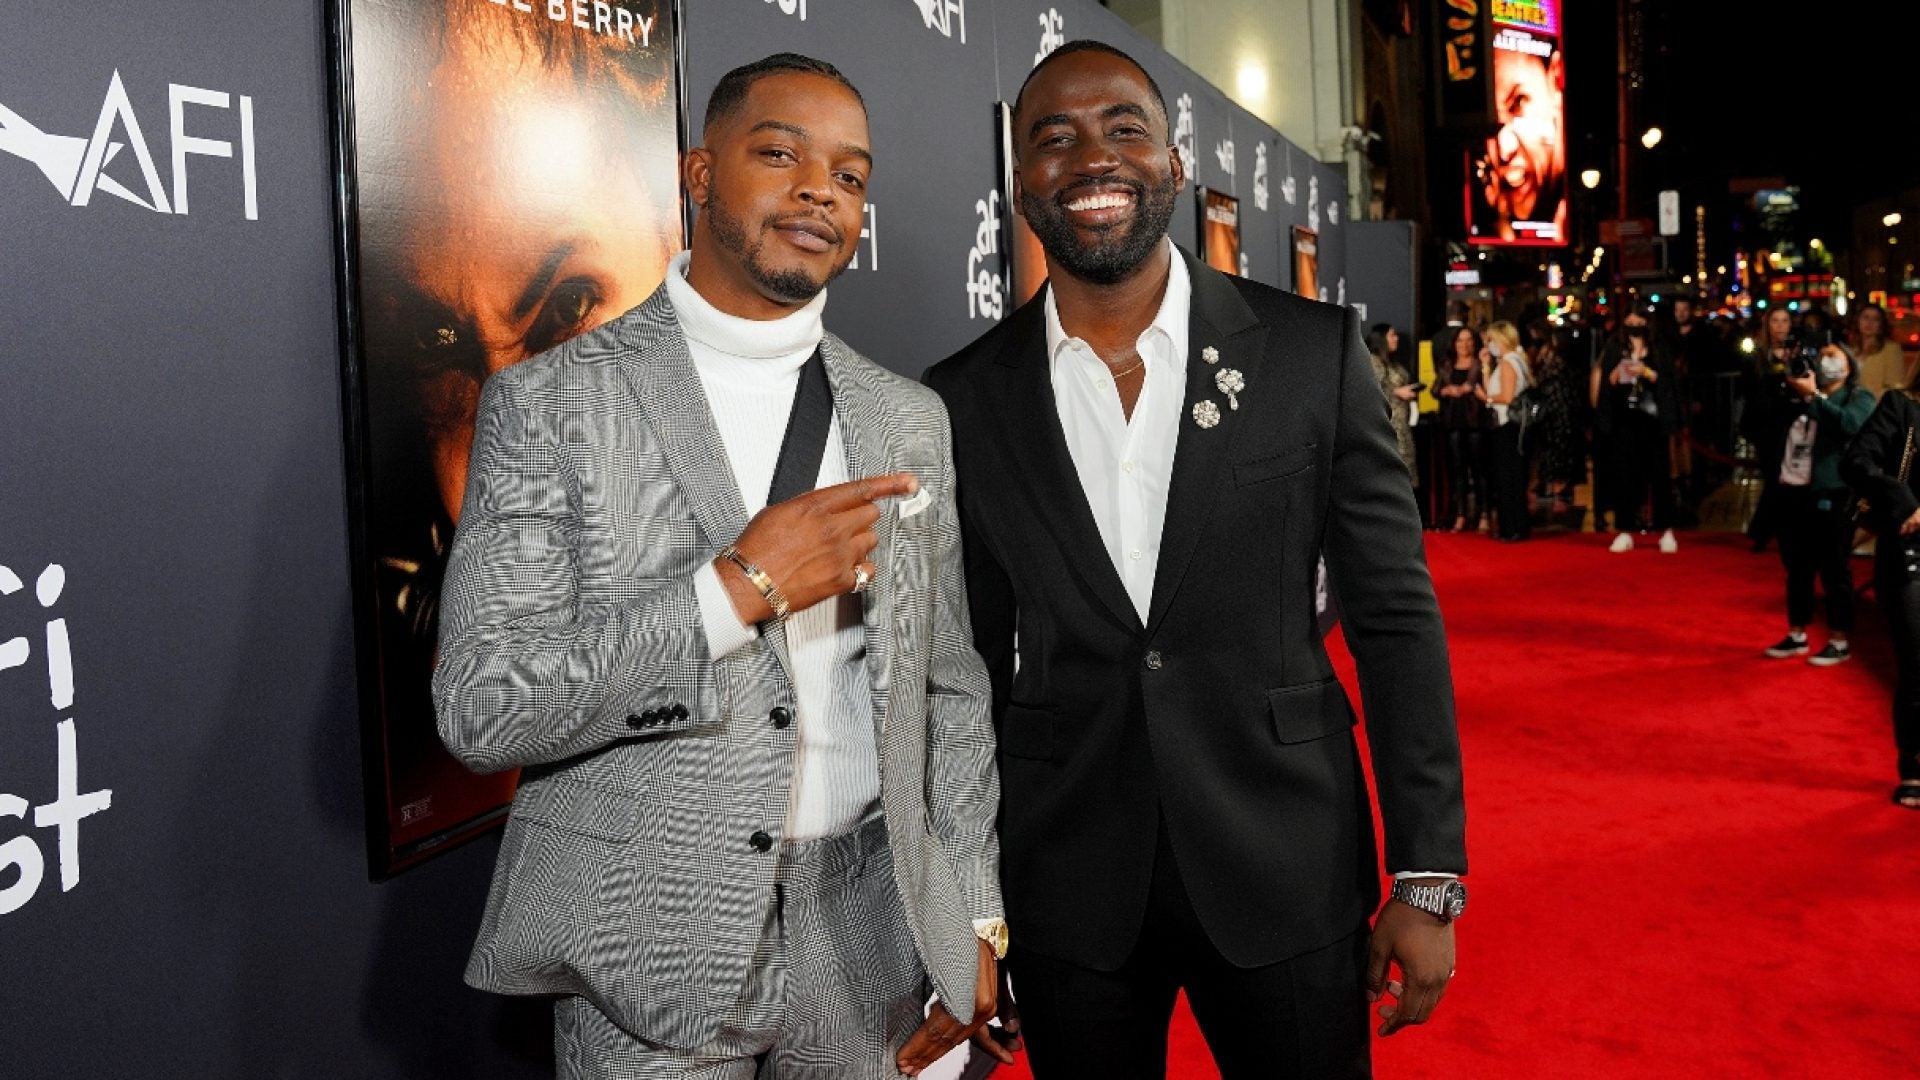 He's My Best Friend: Stephan James Supports Brother, Shamier Anderson, At The Premiere Of 'Bruised'